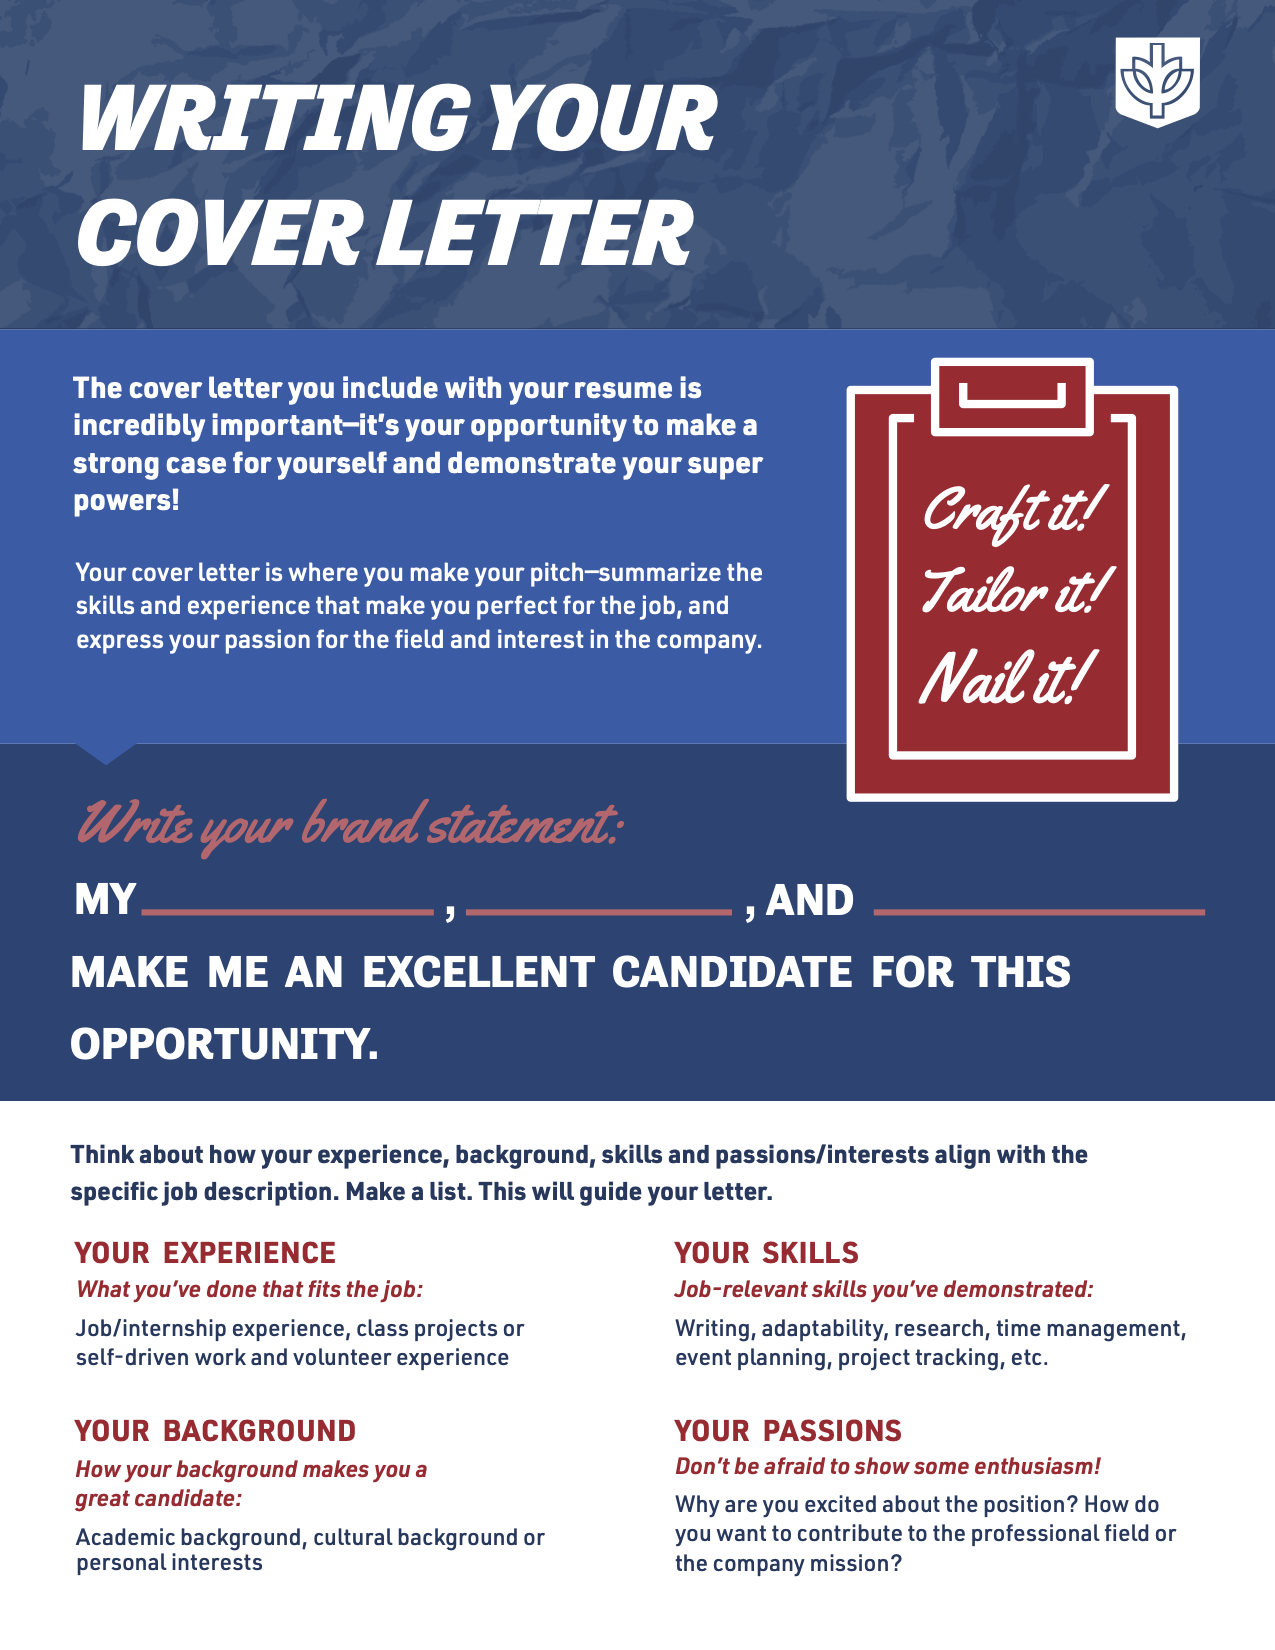 Writing Your Cover Letter